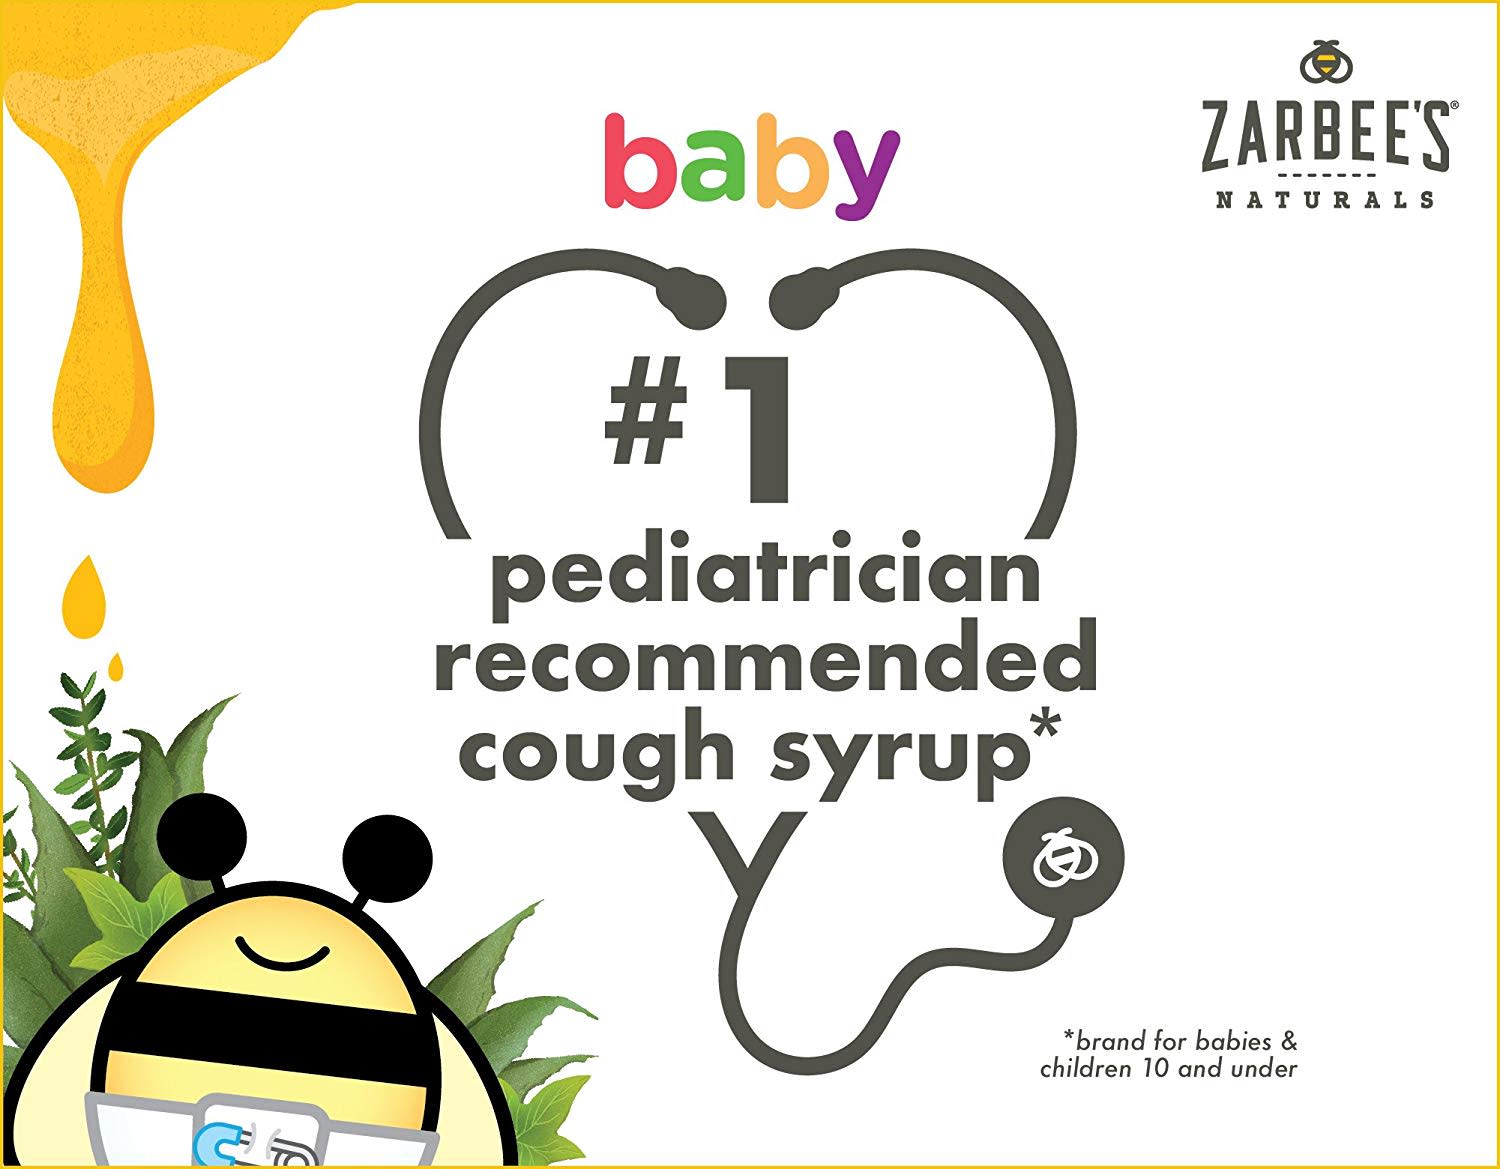 Zarbee's Naturals Baby Cough Syrup with Agave & Thyme, Natural Grape, 2 fl oz - image 2 of 8